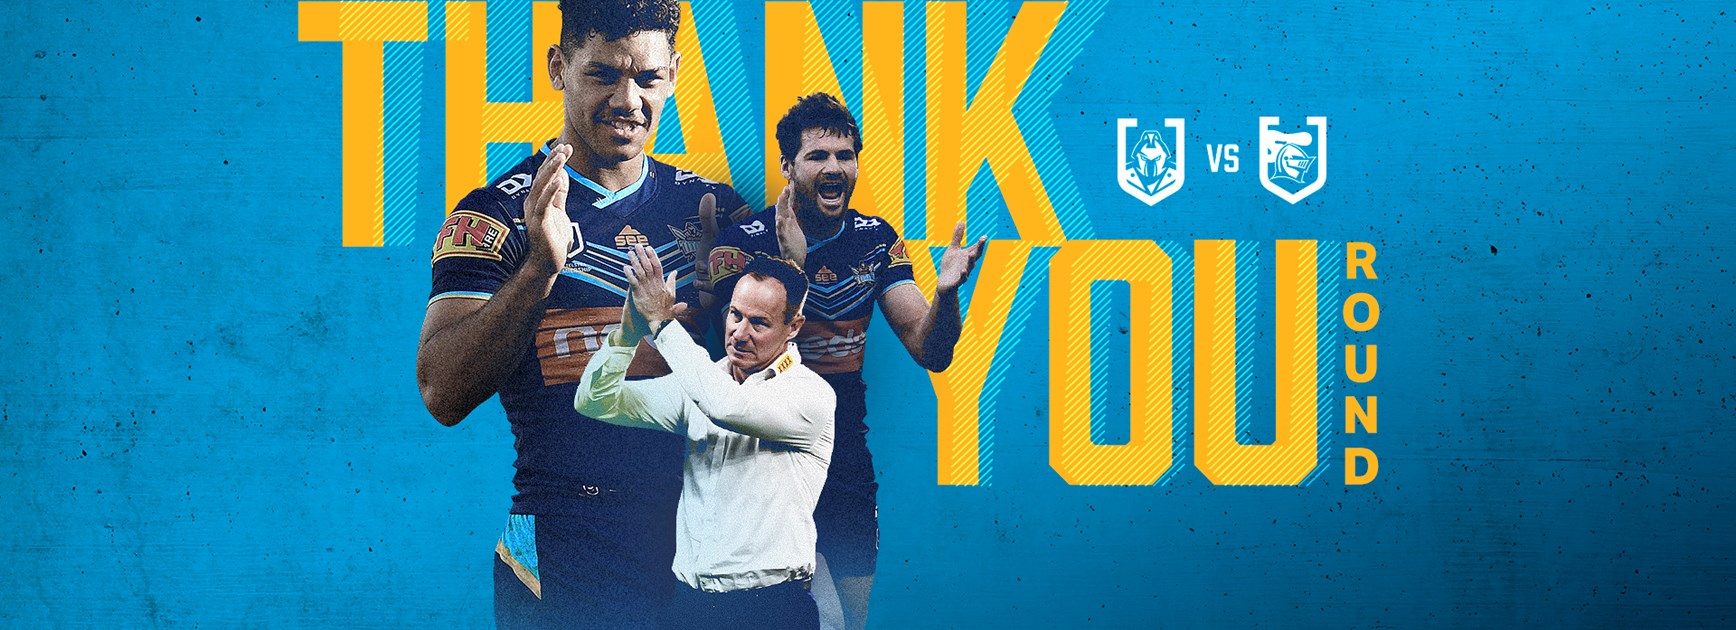 Titans say 'thank you' to Members and fans